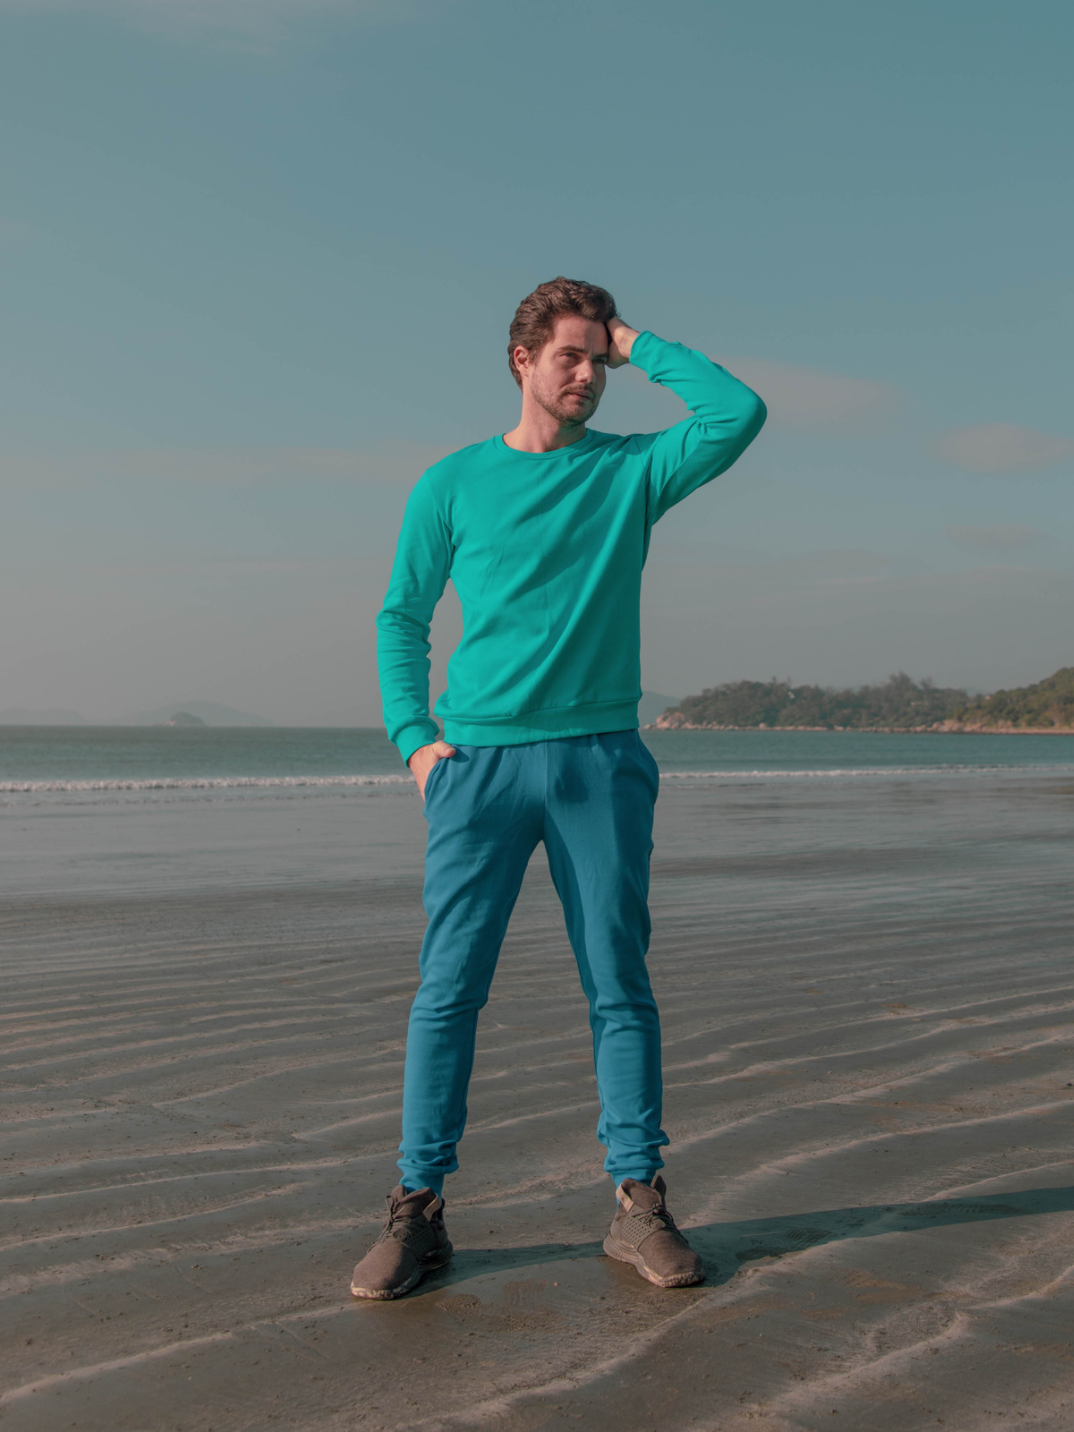 blue sweatshirt that's water-resistant, bacterially-defensive and ecologically-sustainable.